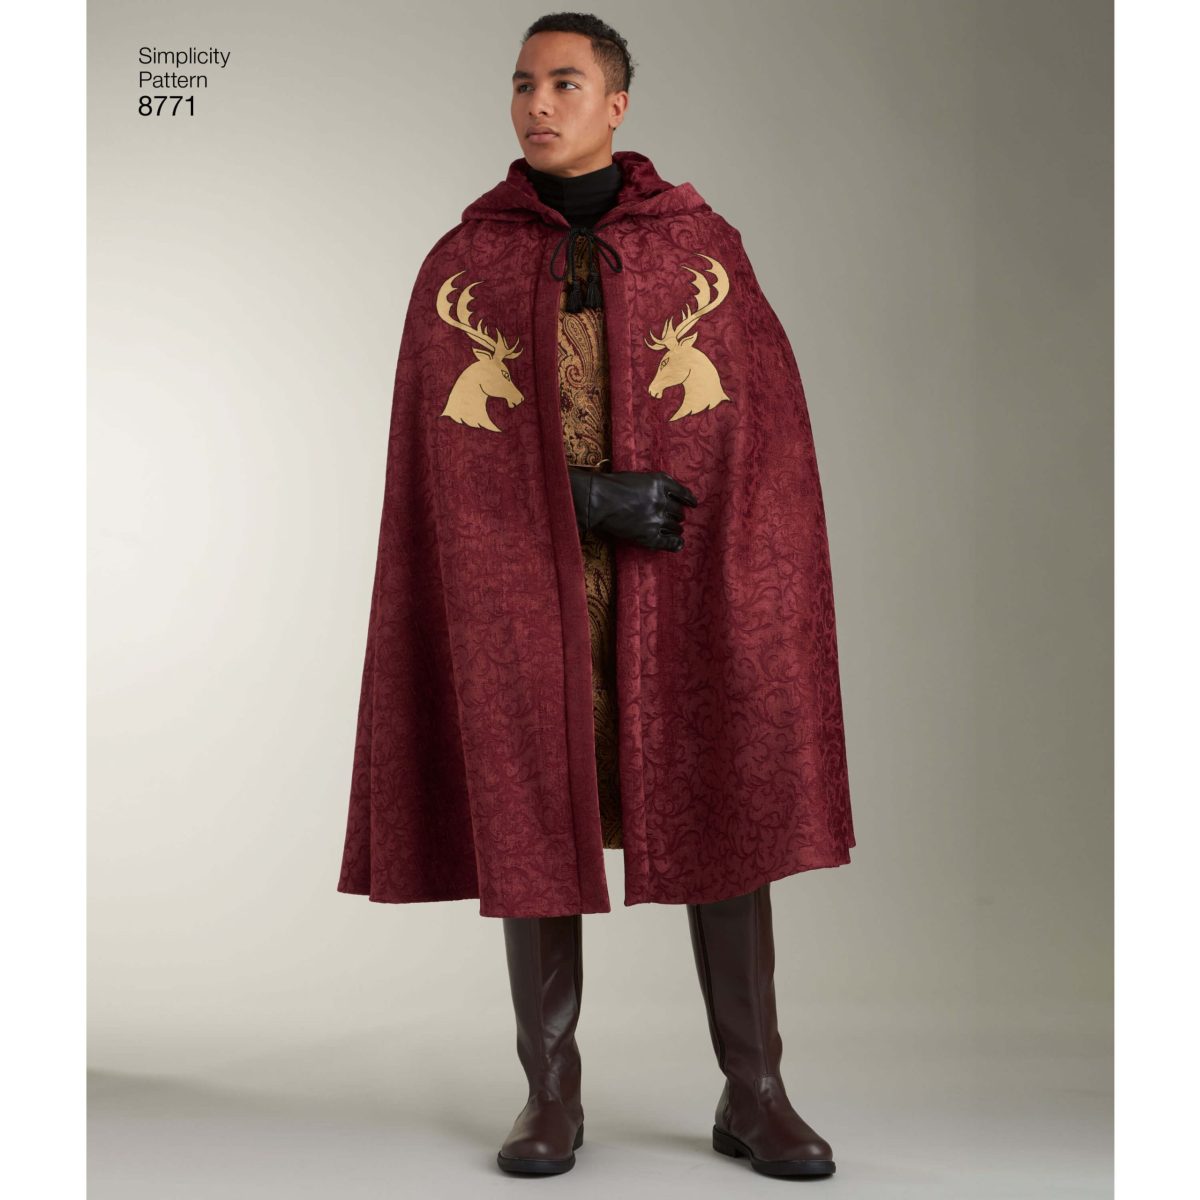 Simplicity Sewing Pattern 8771 Unisex Capes